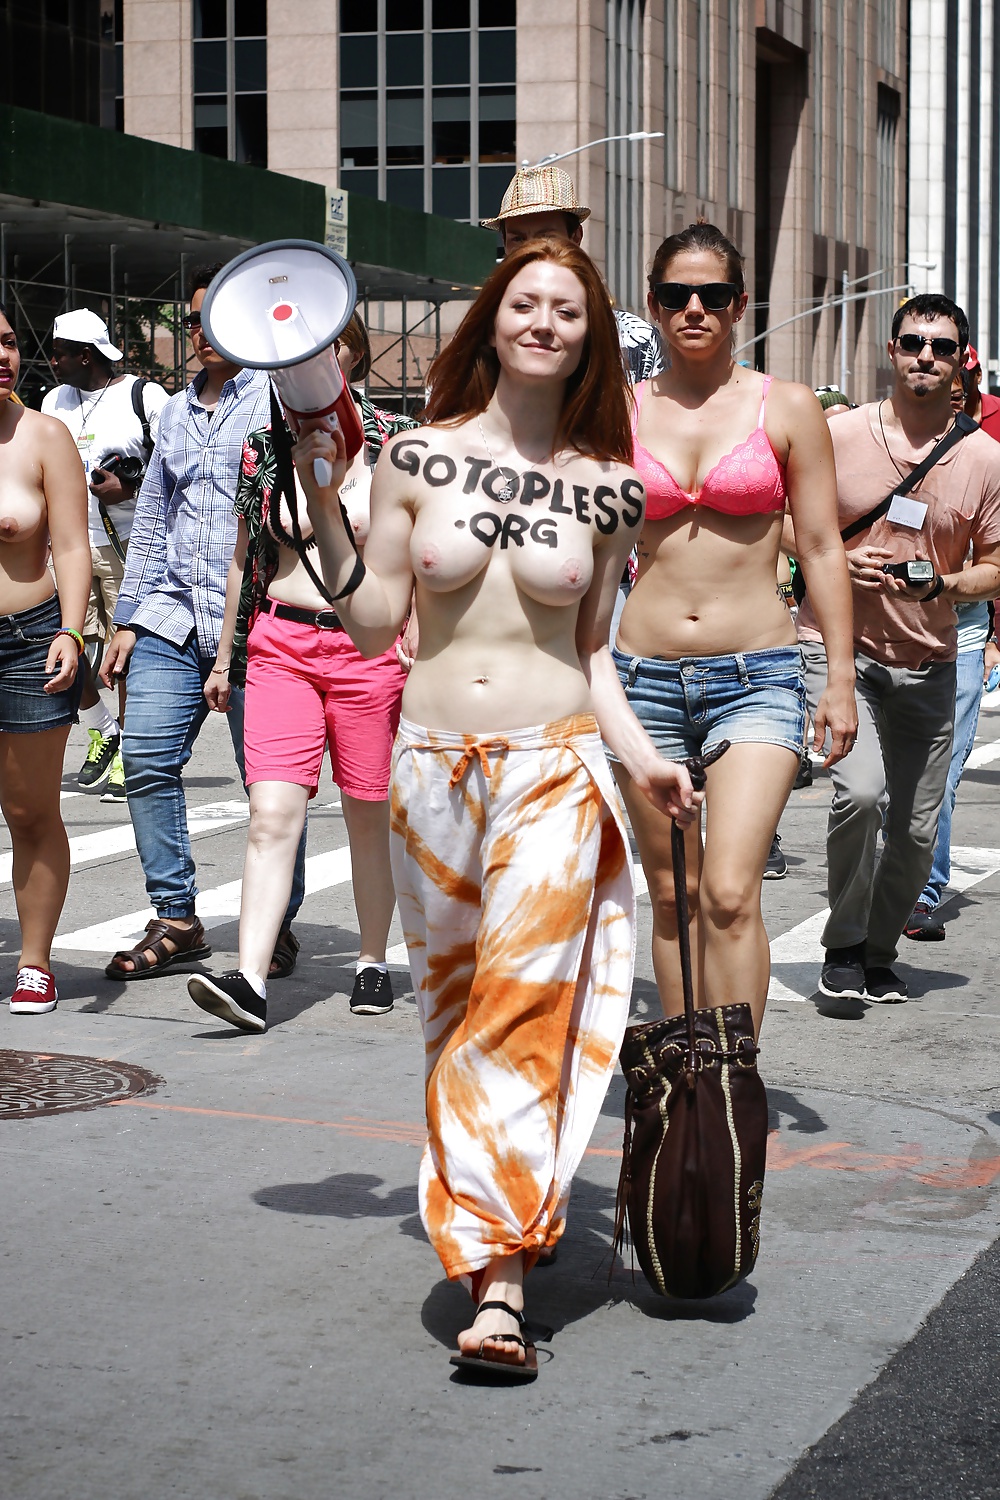 Hundreds Of Women March Naked Through New York To Call For Women's Rig...